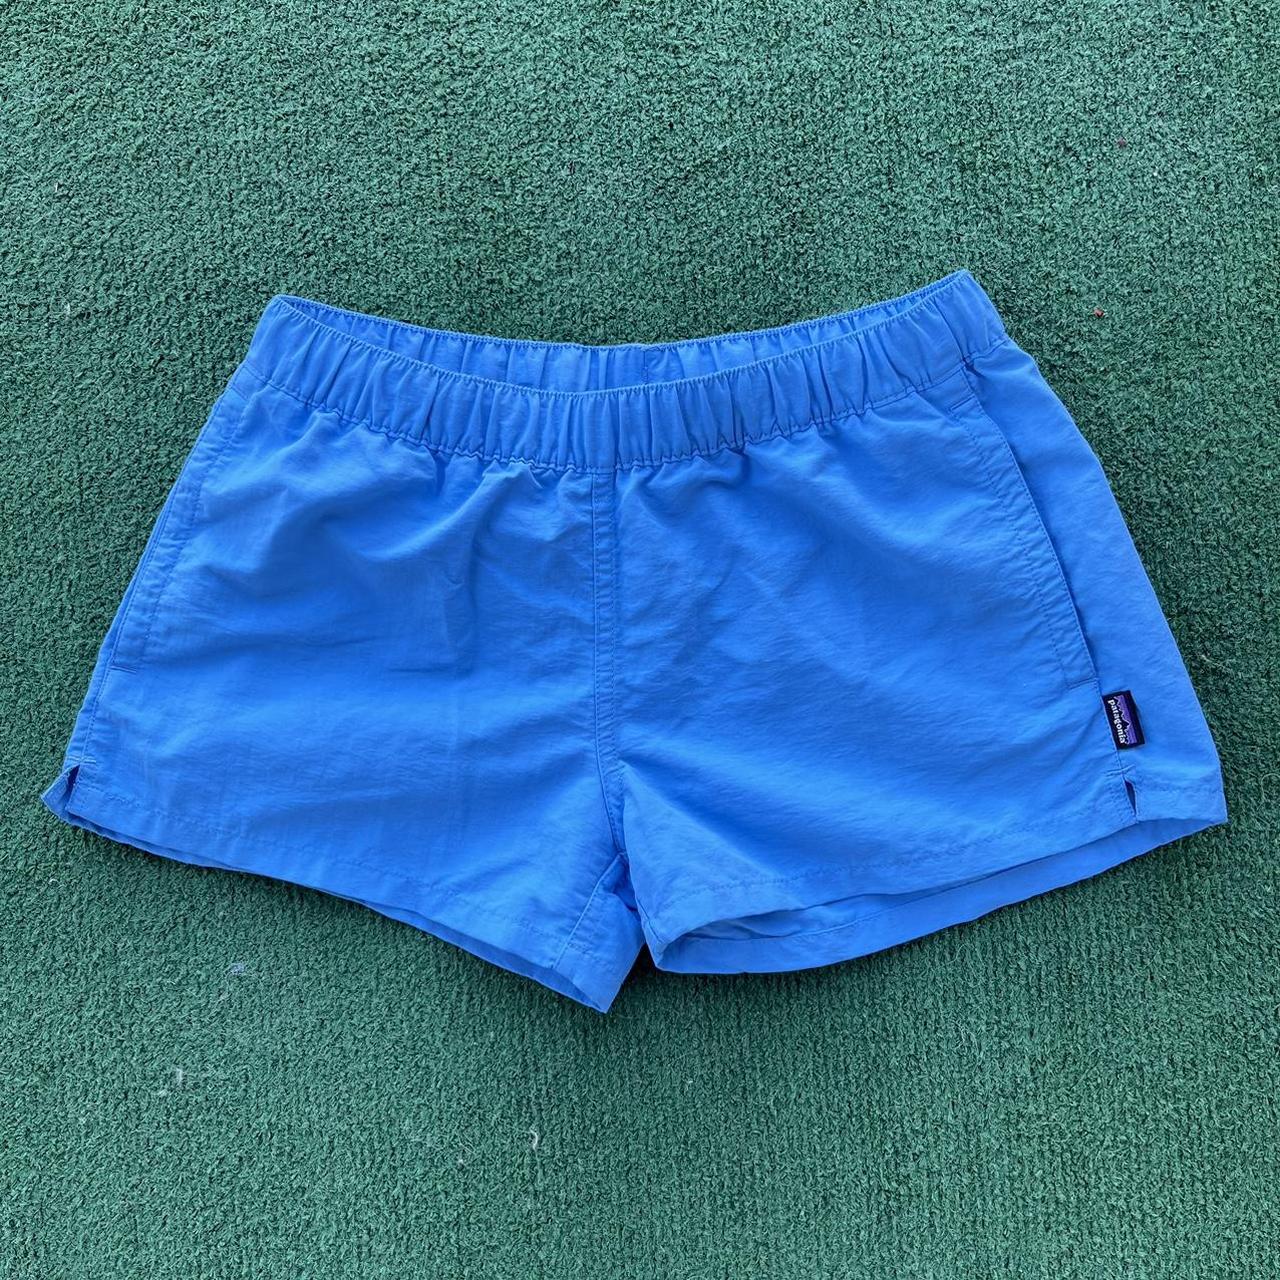 Women’s Patagonia shorts size small in light blue.... - Depop